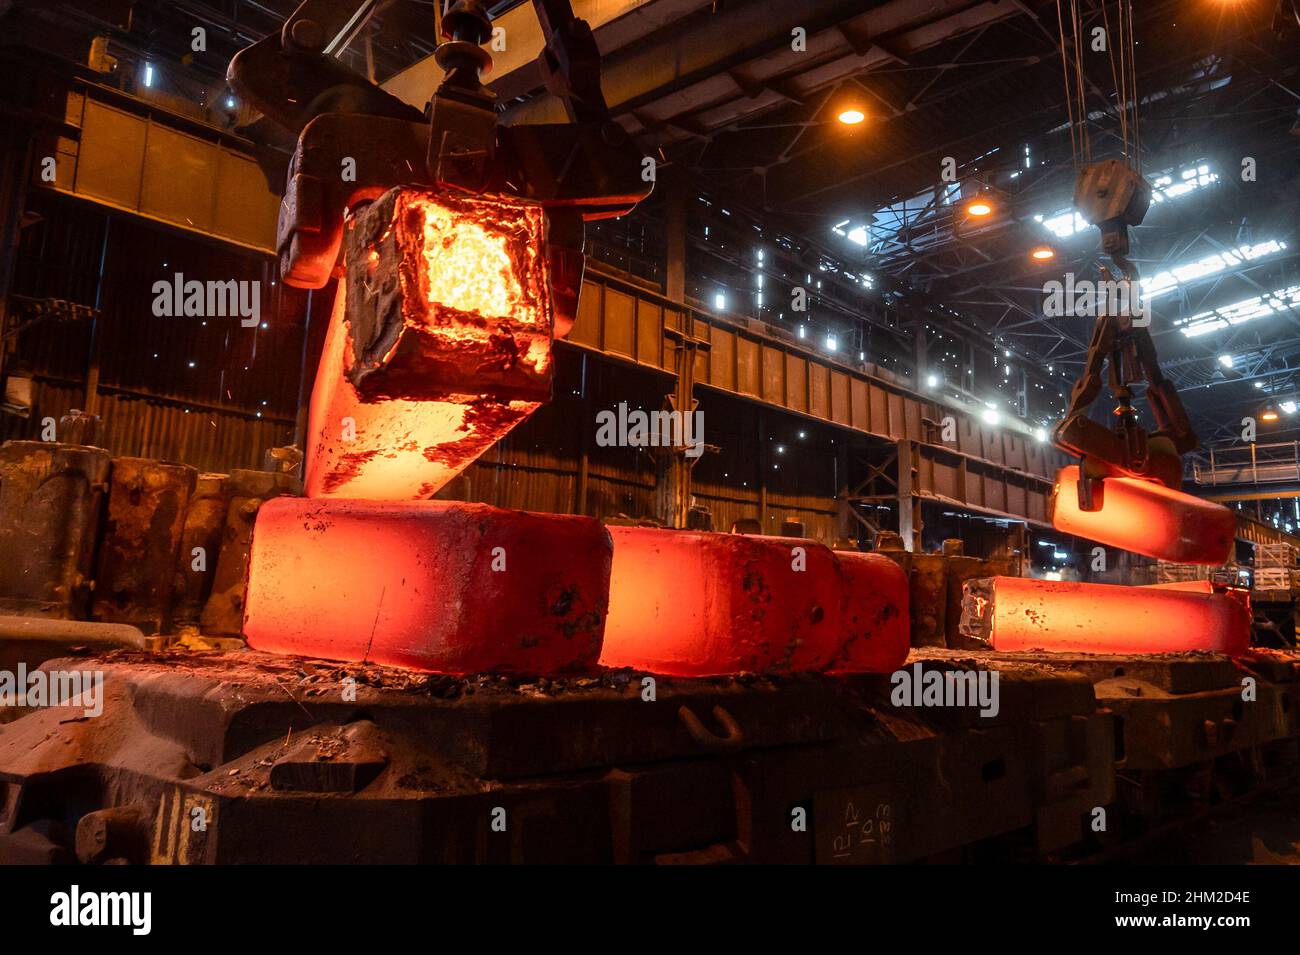 The red-hot metal casting is piled on the platform Stock Photo